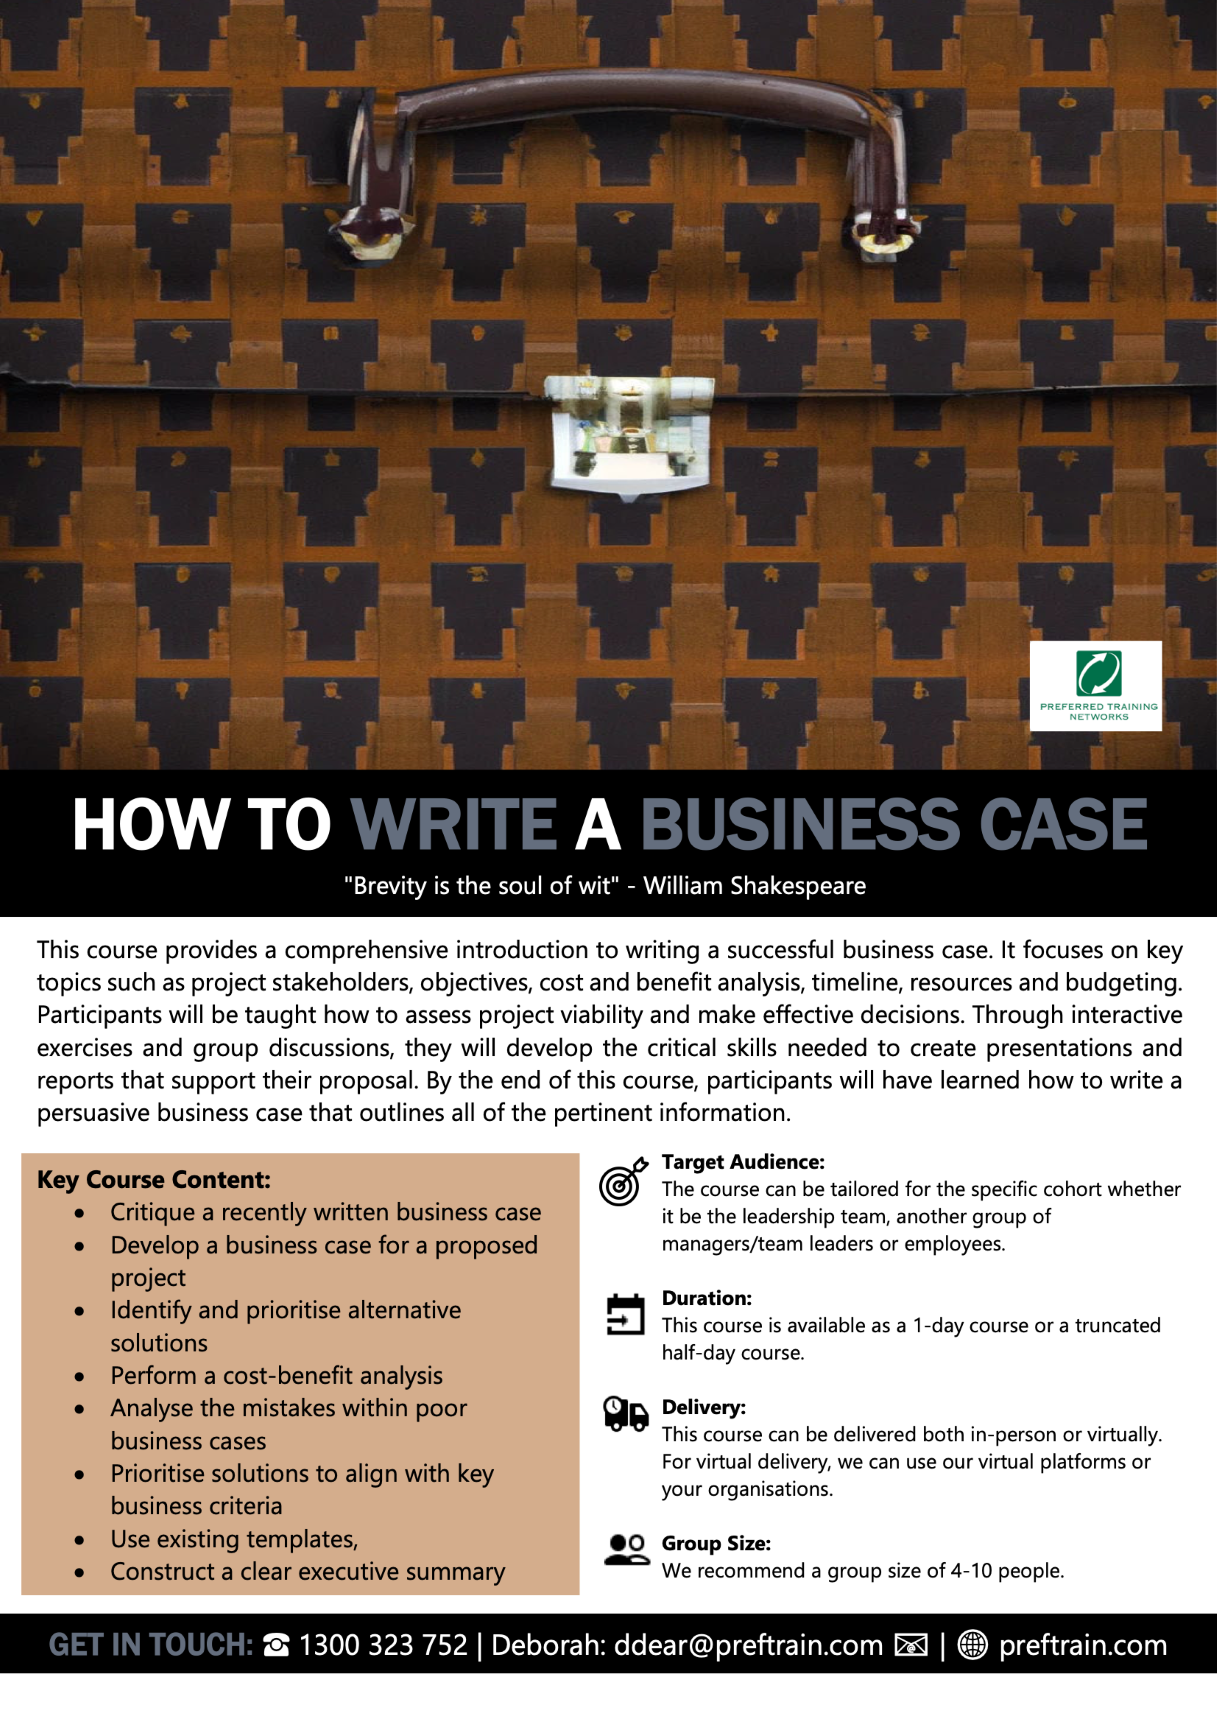 How to Write a Business Case